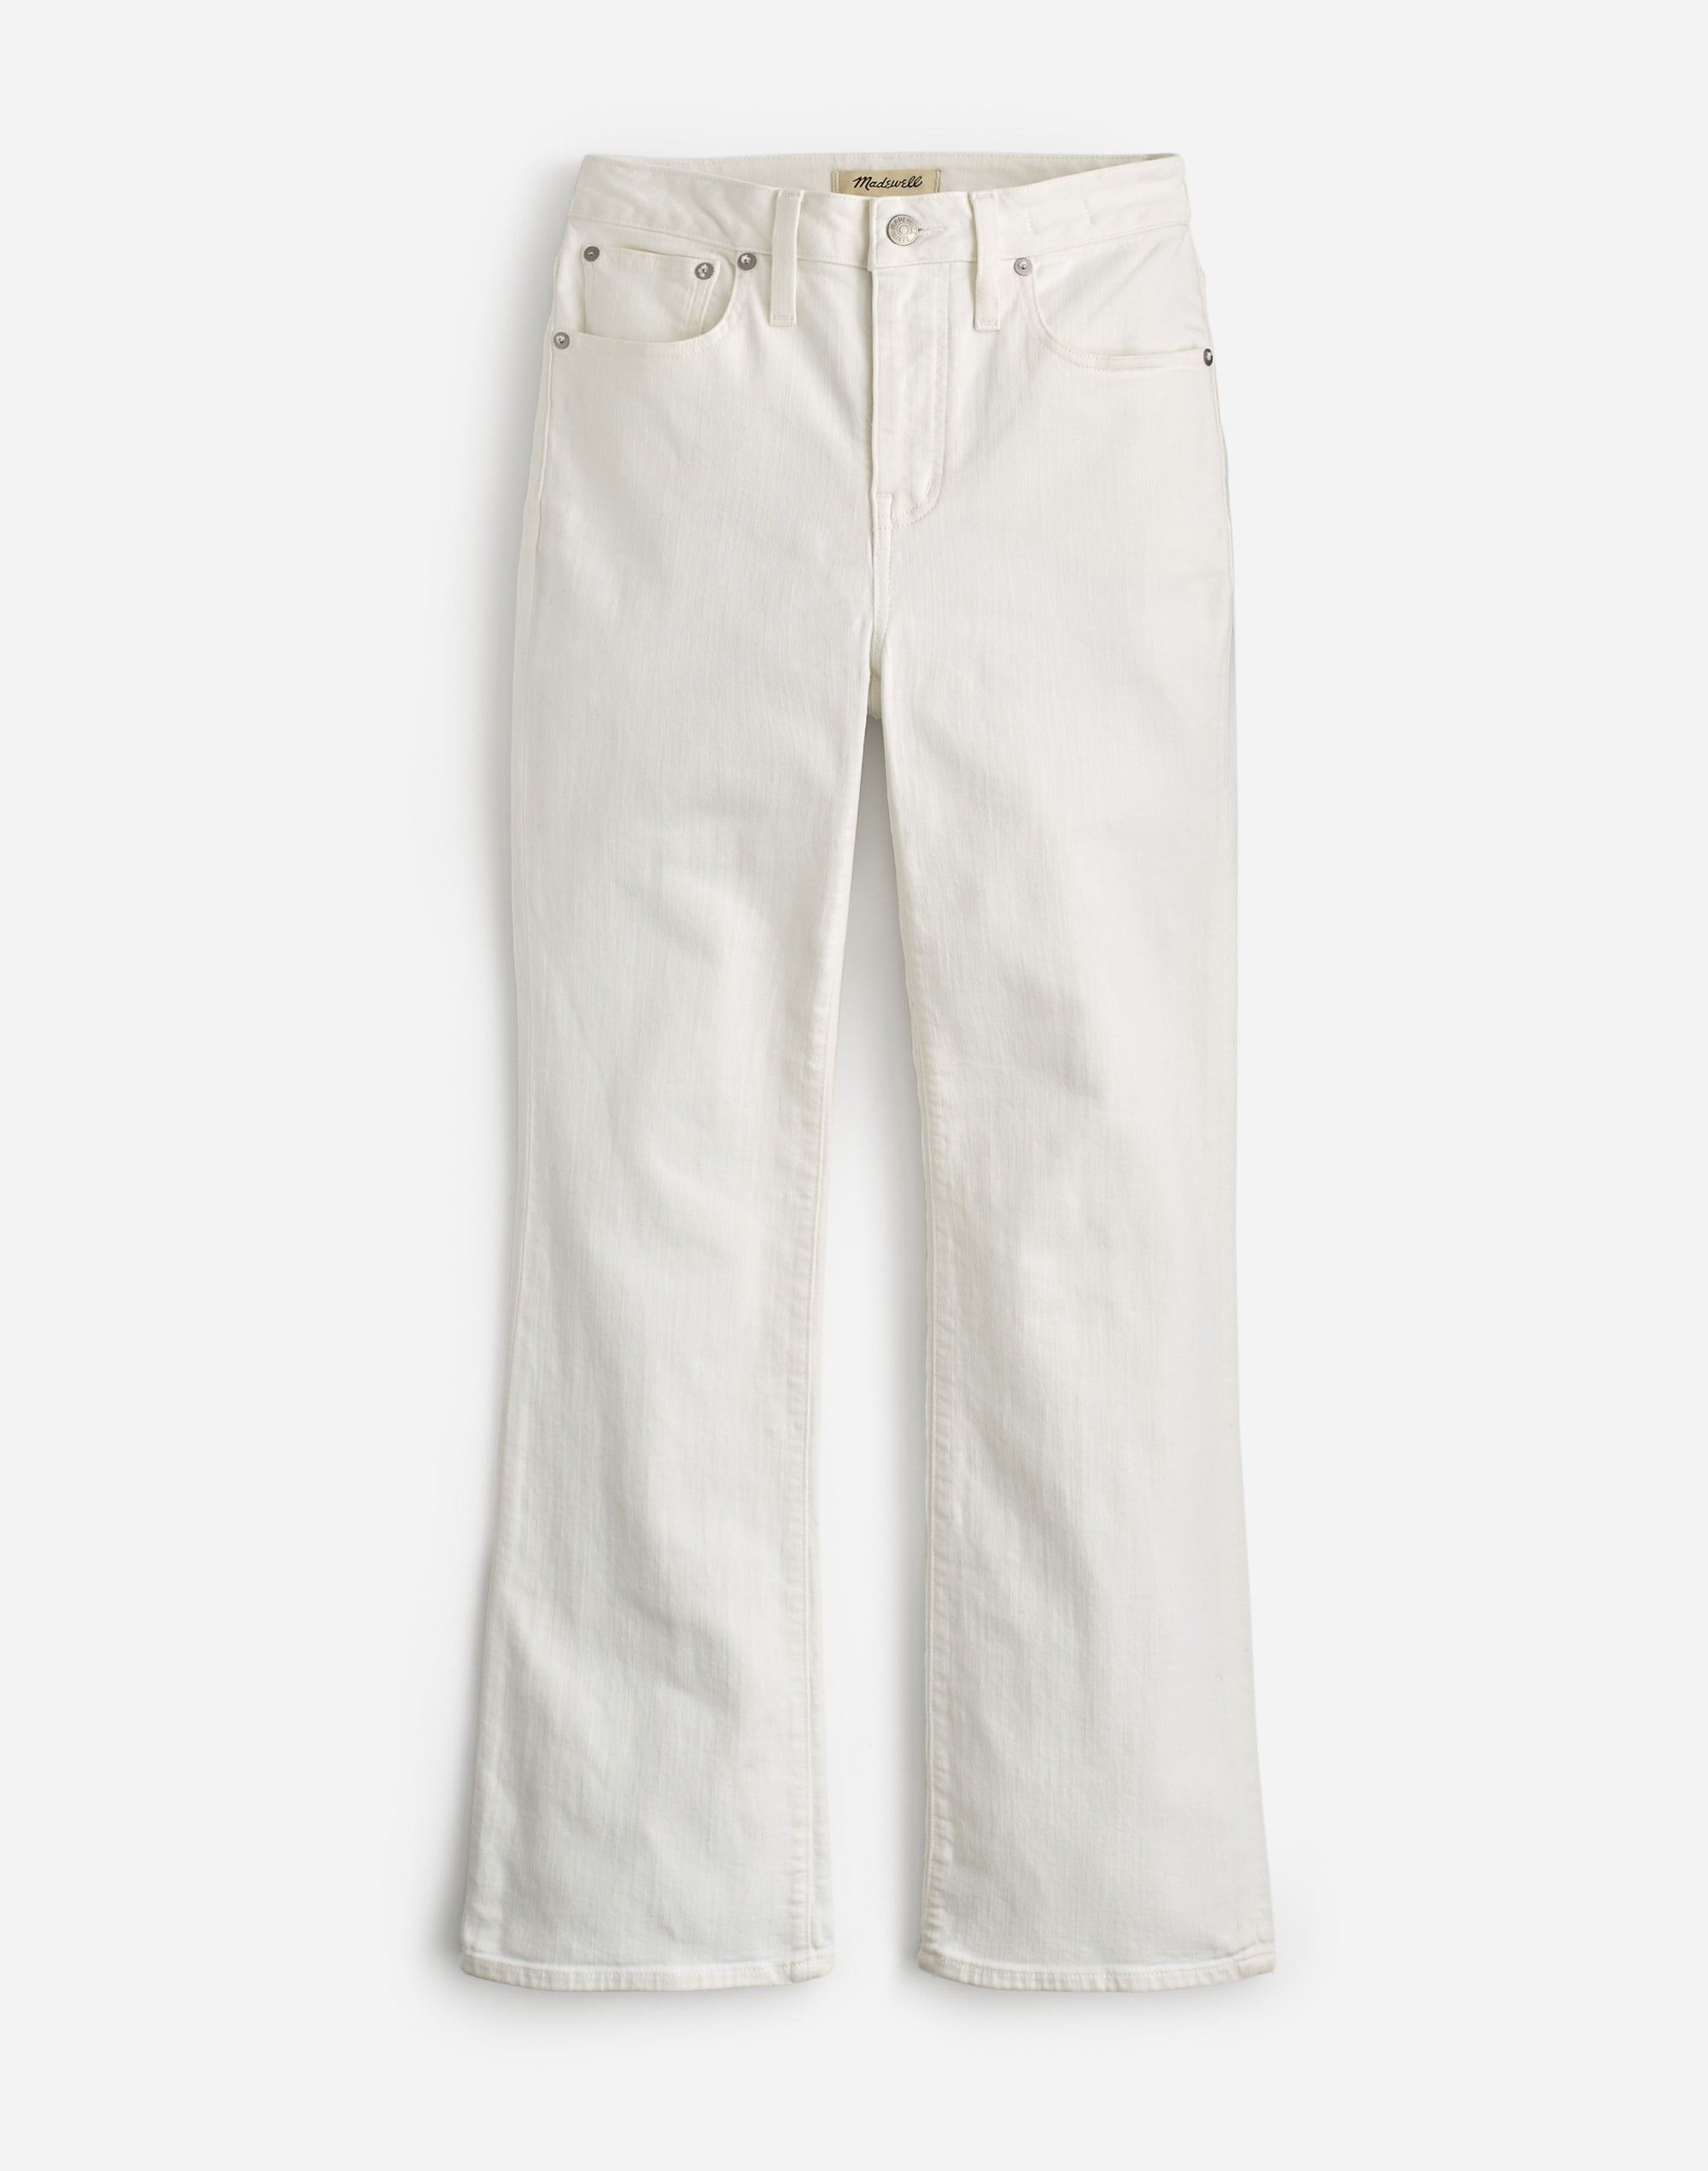 Kick Out Crop Jeans in Pure White | Madewell